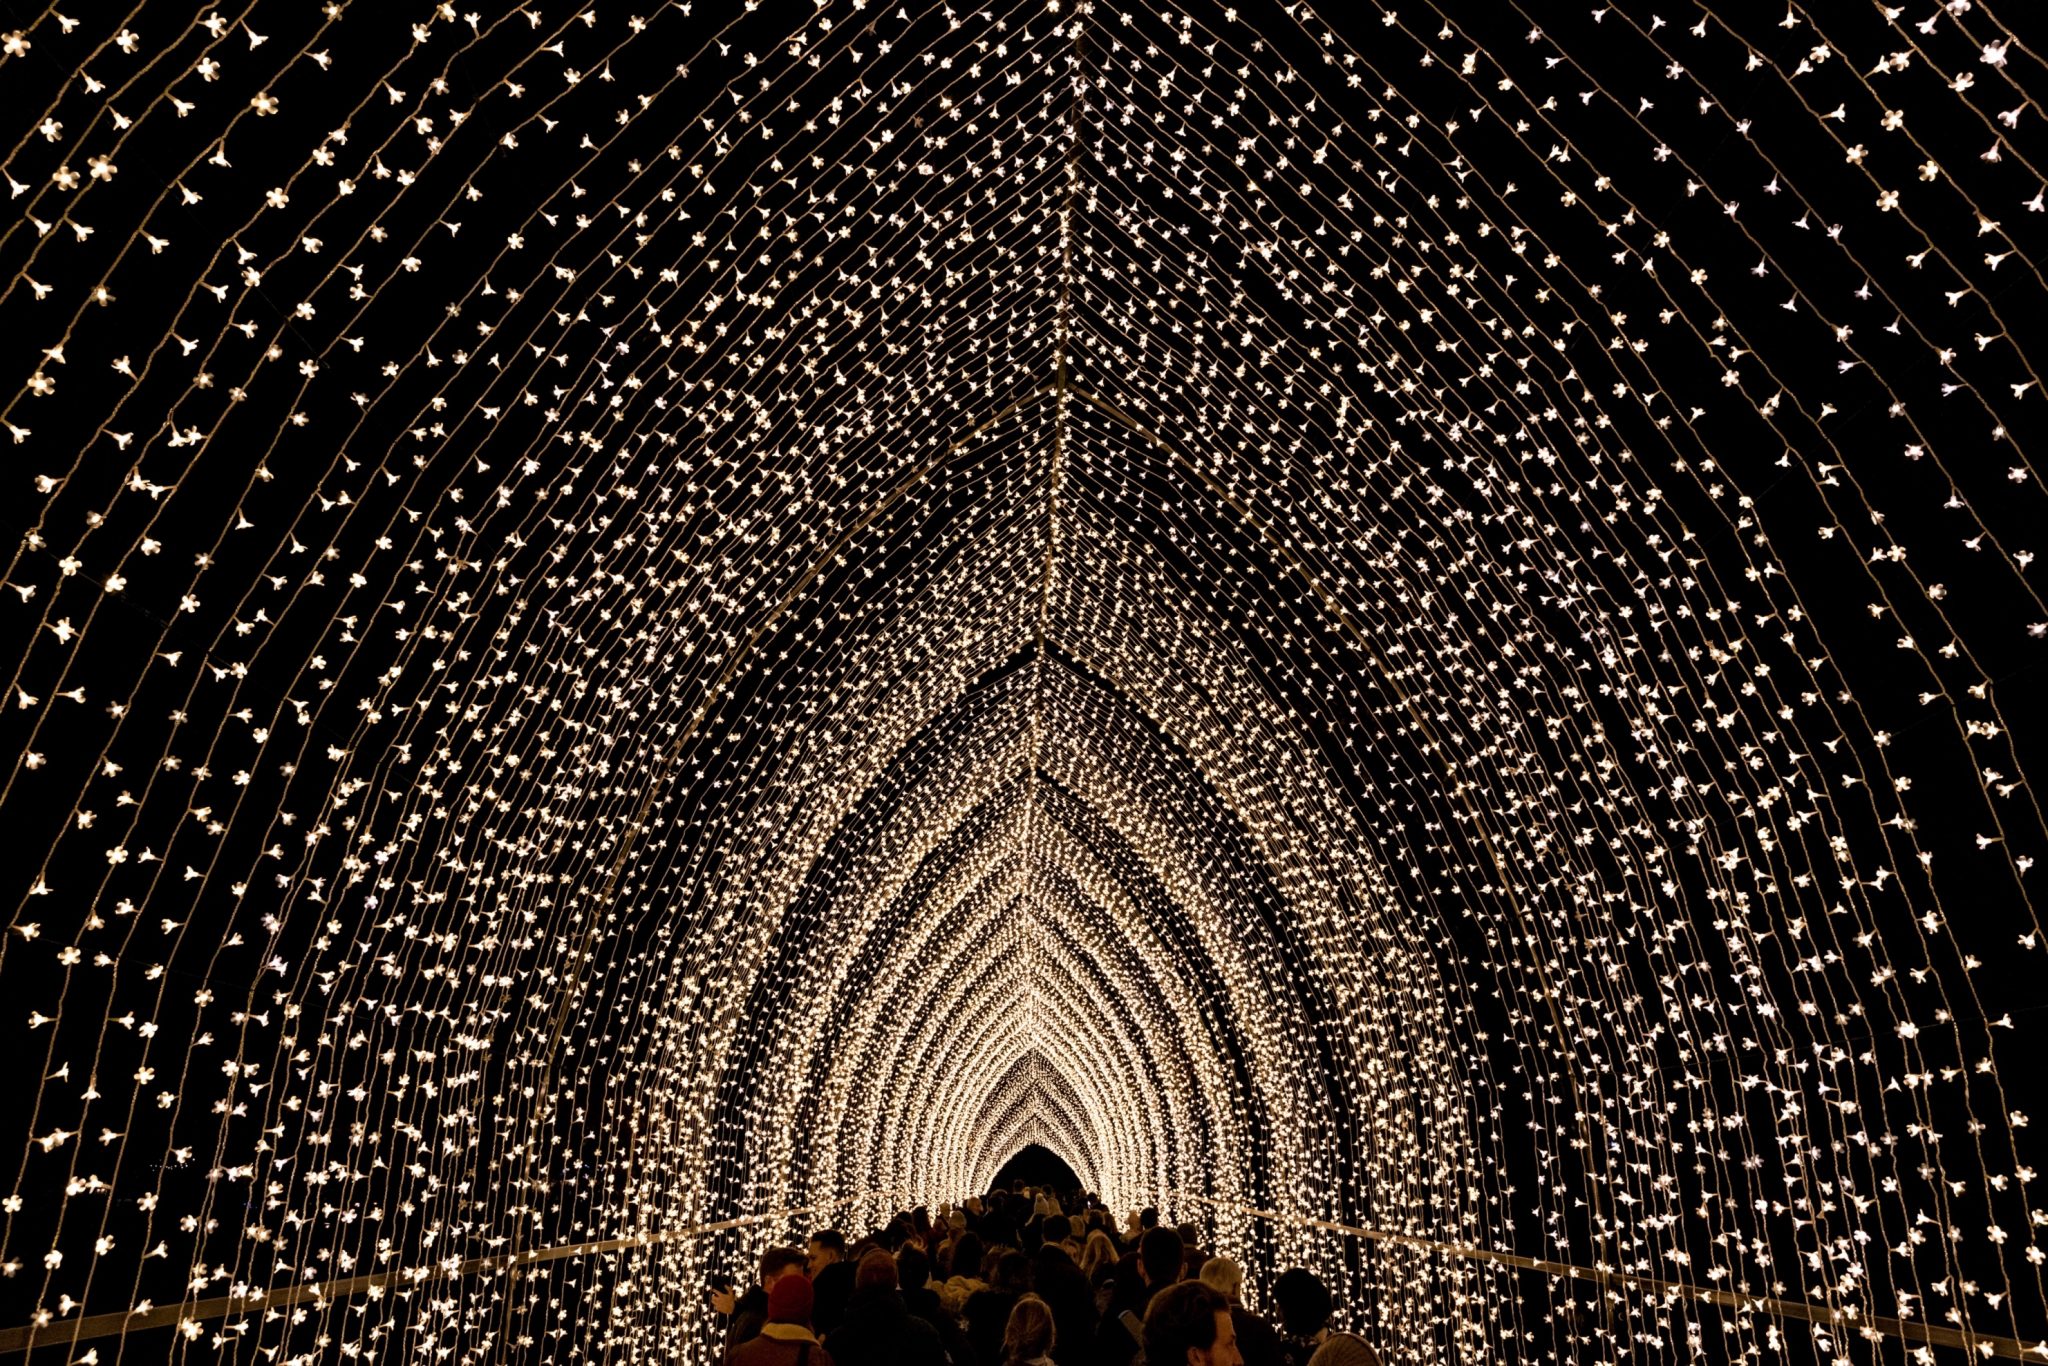 The Gingerbread Man’s Spectacular Holiday Light Adventure